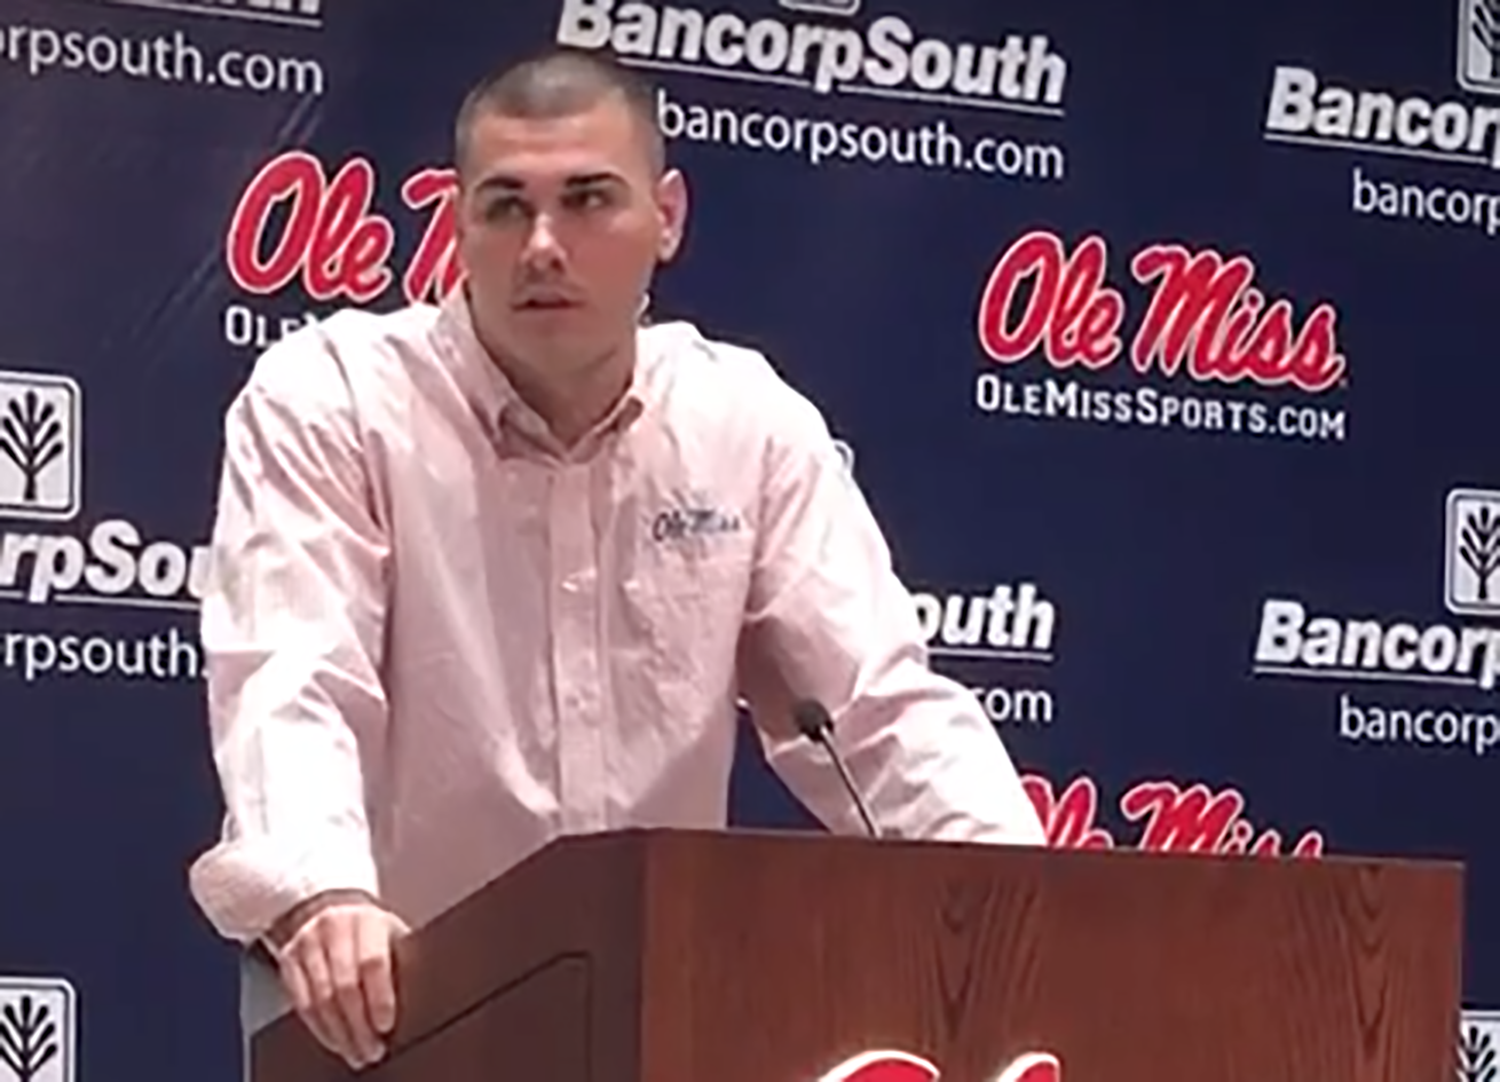 Mississippi Quarterback Porn Star - Company offers Ole Miss QB Chad Kelly date with a porn star - The Oxford  Eagle | The Oxford Eagle